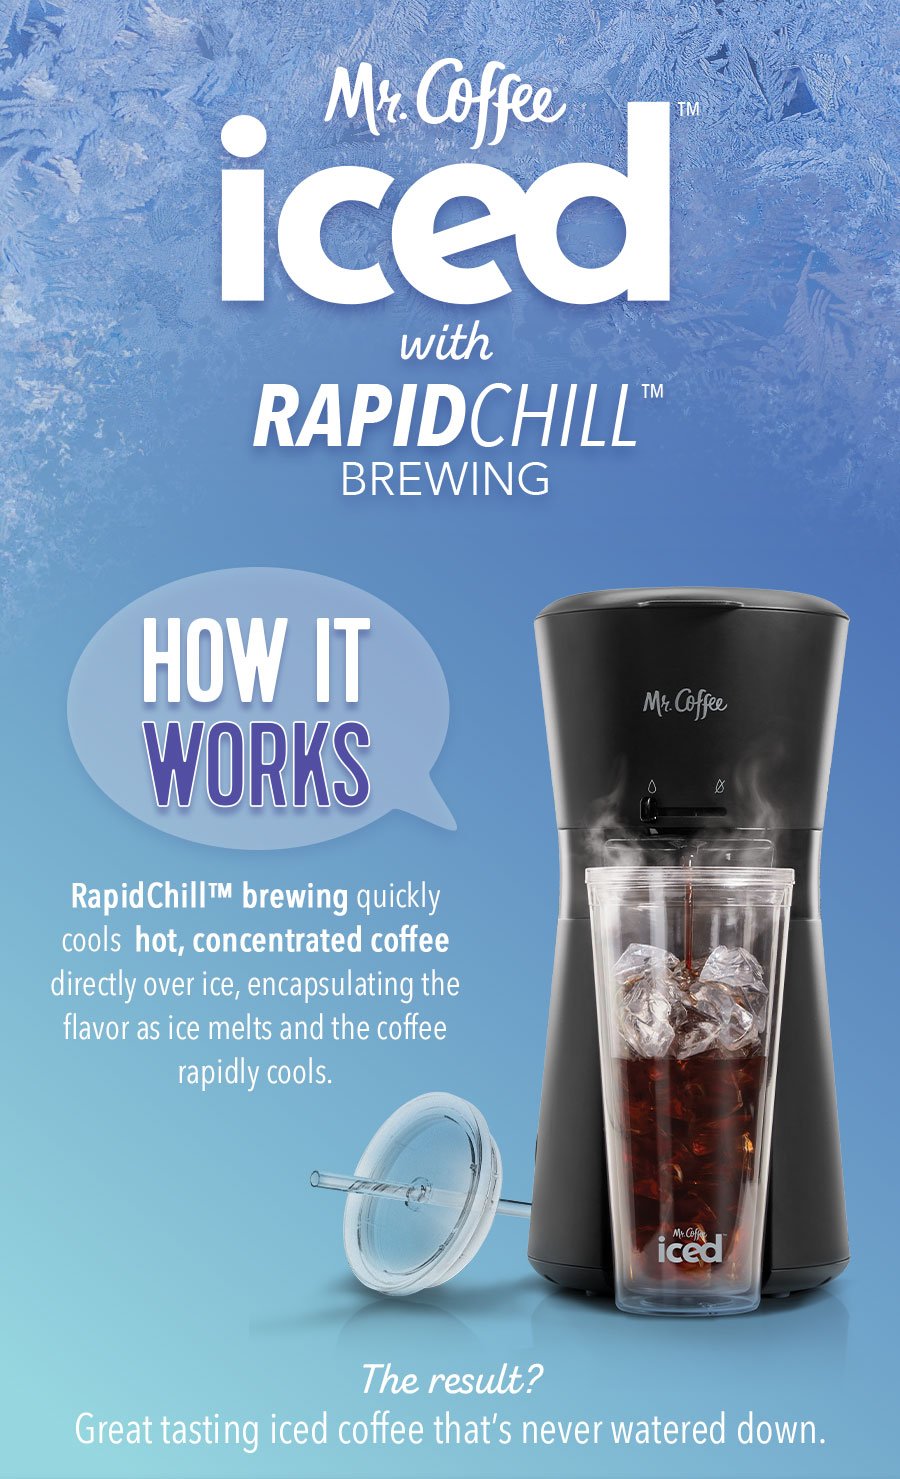 Mr Coffee: The Chill Factor: How RapidChill Works